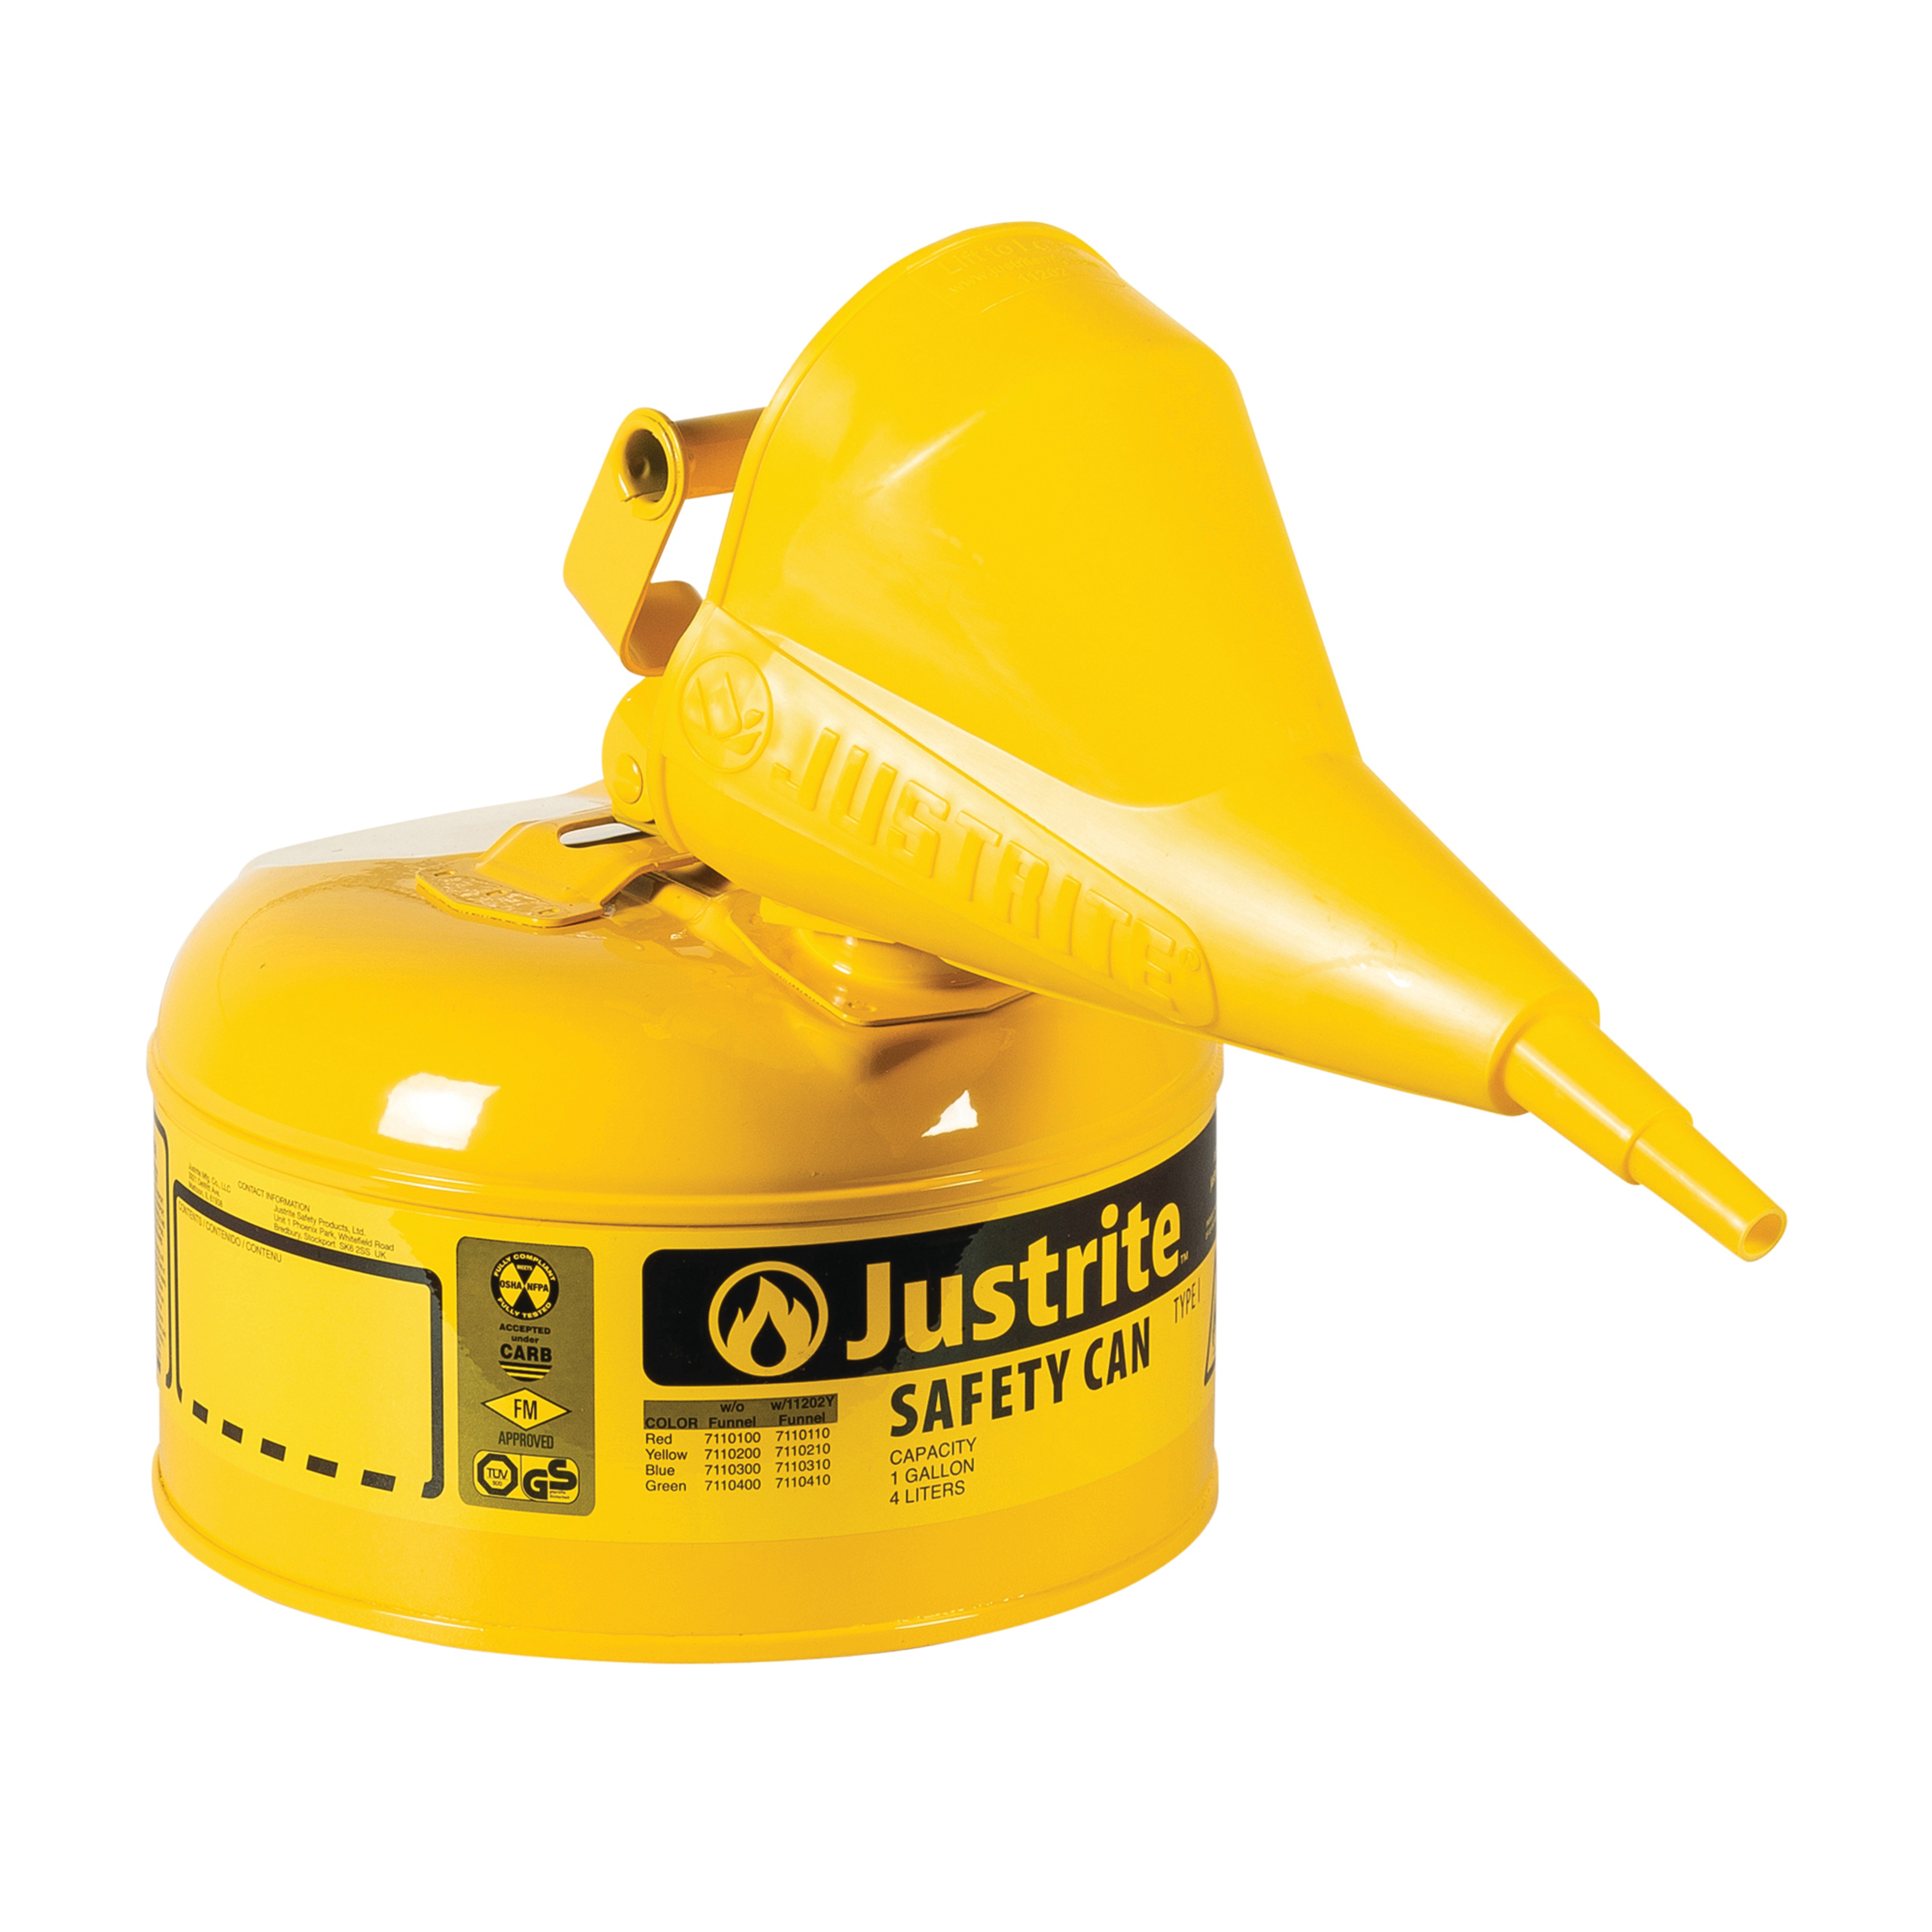 Justrite Swinging Handle Type 1 Safety Cans with Funnel Yellow - Spill Containment